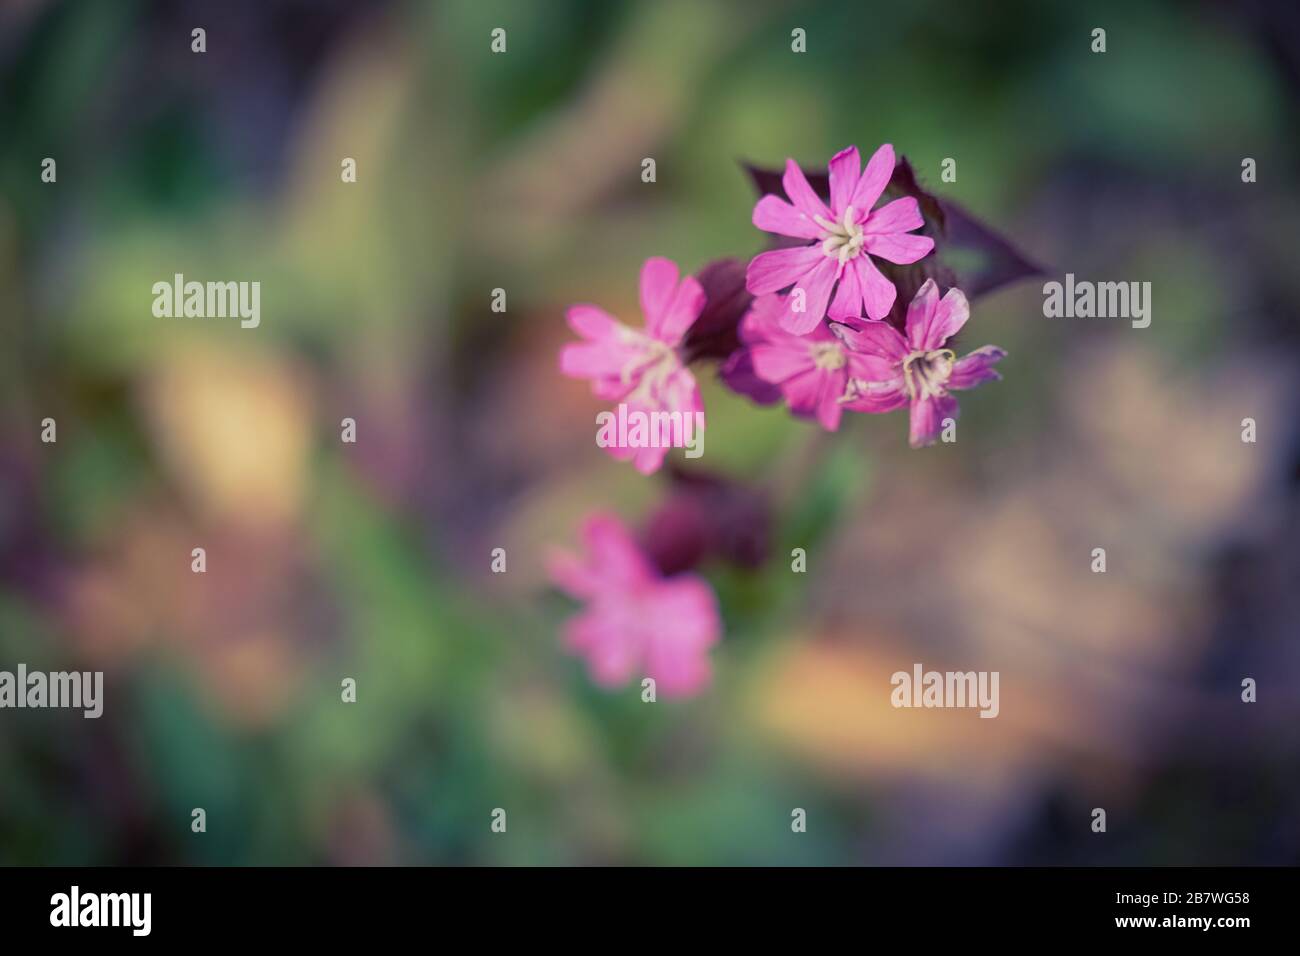 Red campion blossoms before an out-of-focus background Stock Photo